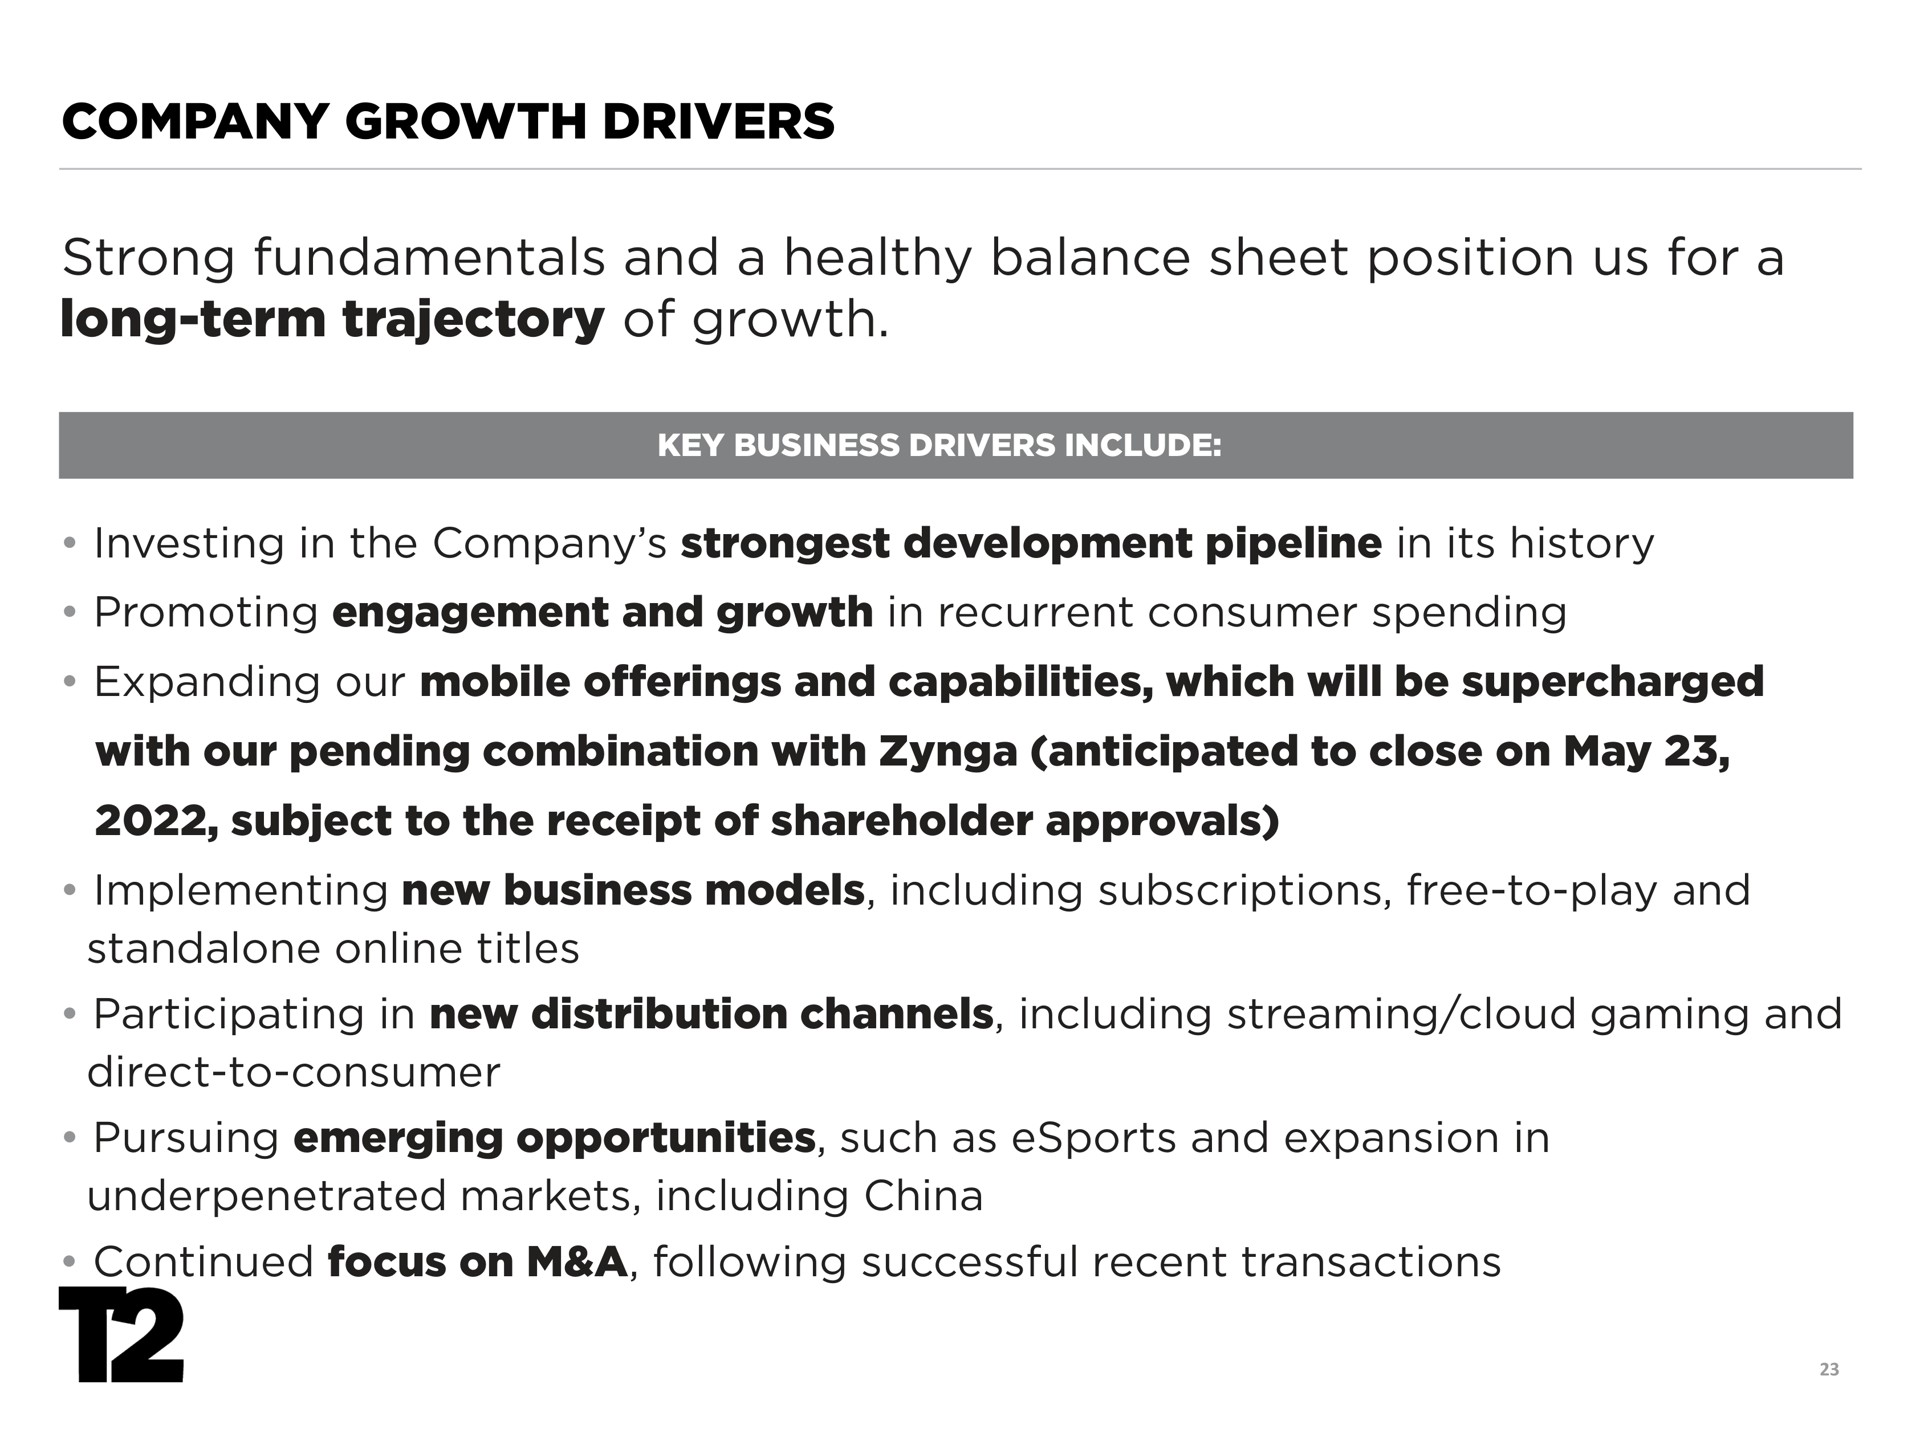 company growth drivers strong fundamentals and a healthy balance sheet position us for a long term trajectory of growth investing in the company development pipeline in its history promoting engagement and growth in recurrent consumer spending expanding our mobile offerings and capabilities which will be supercharged with our pending combination with anticipated to close on may subject to the receipt of shareholder approvals implementing new business models including subscriptions free to play and titles participating in new distribution channels including streaming cloud gaming and direct to consumer pursuing emerging opportunities such as and expansion in markets including china continued focus on a following successful recent transactions fora | Take-Two Interactive